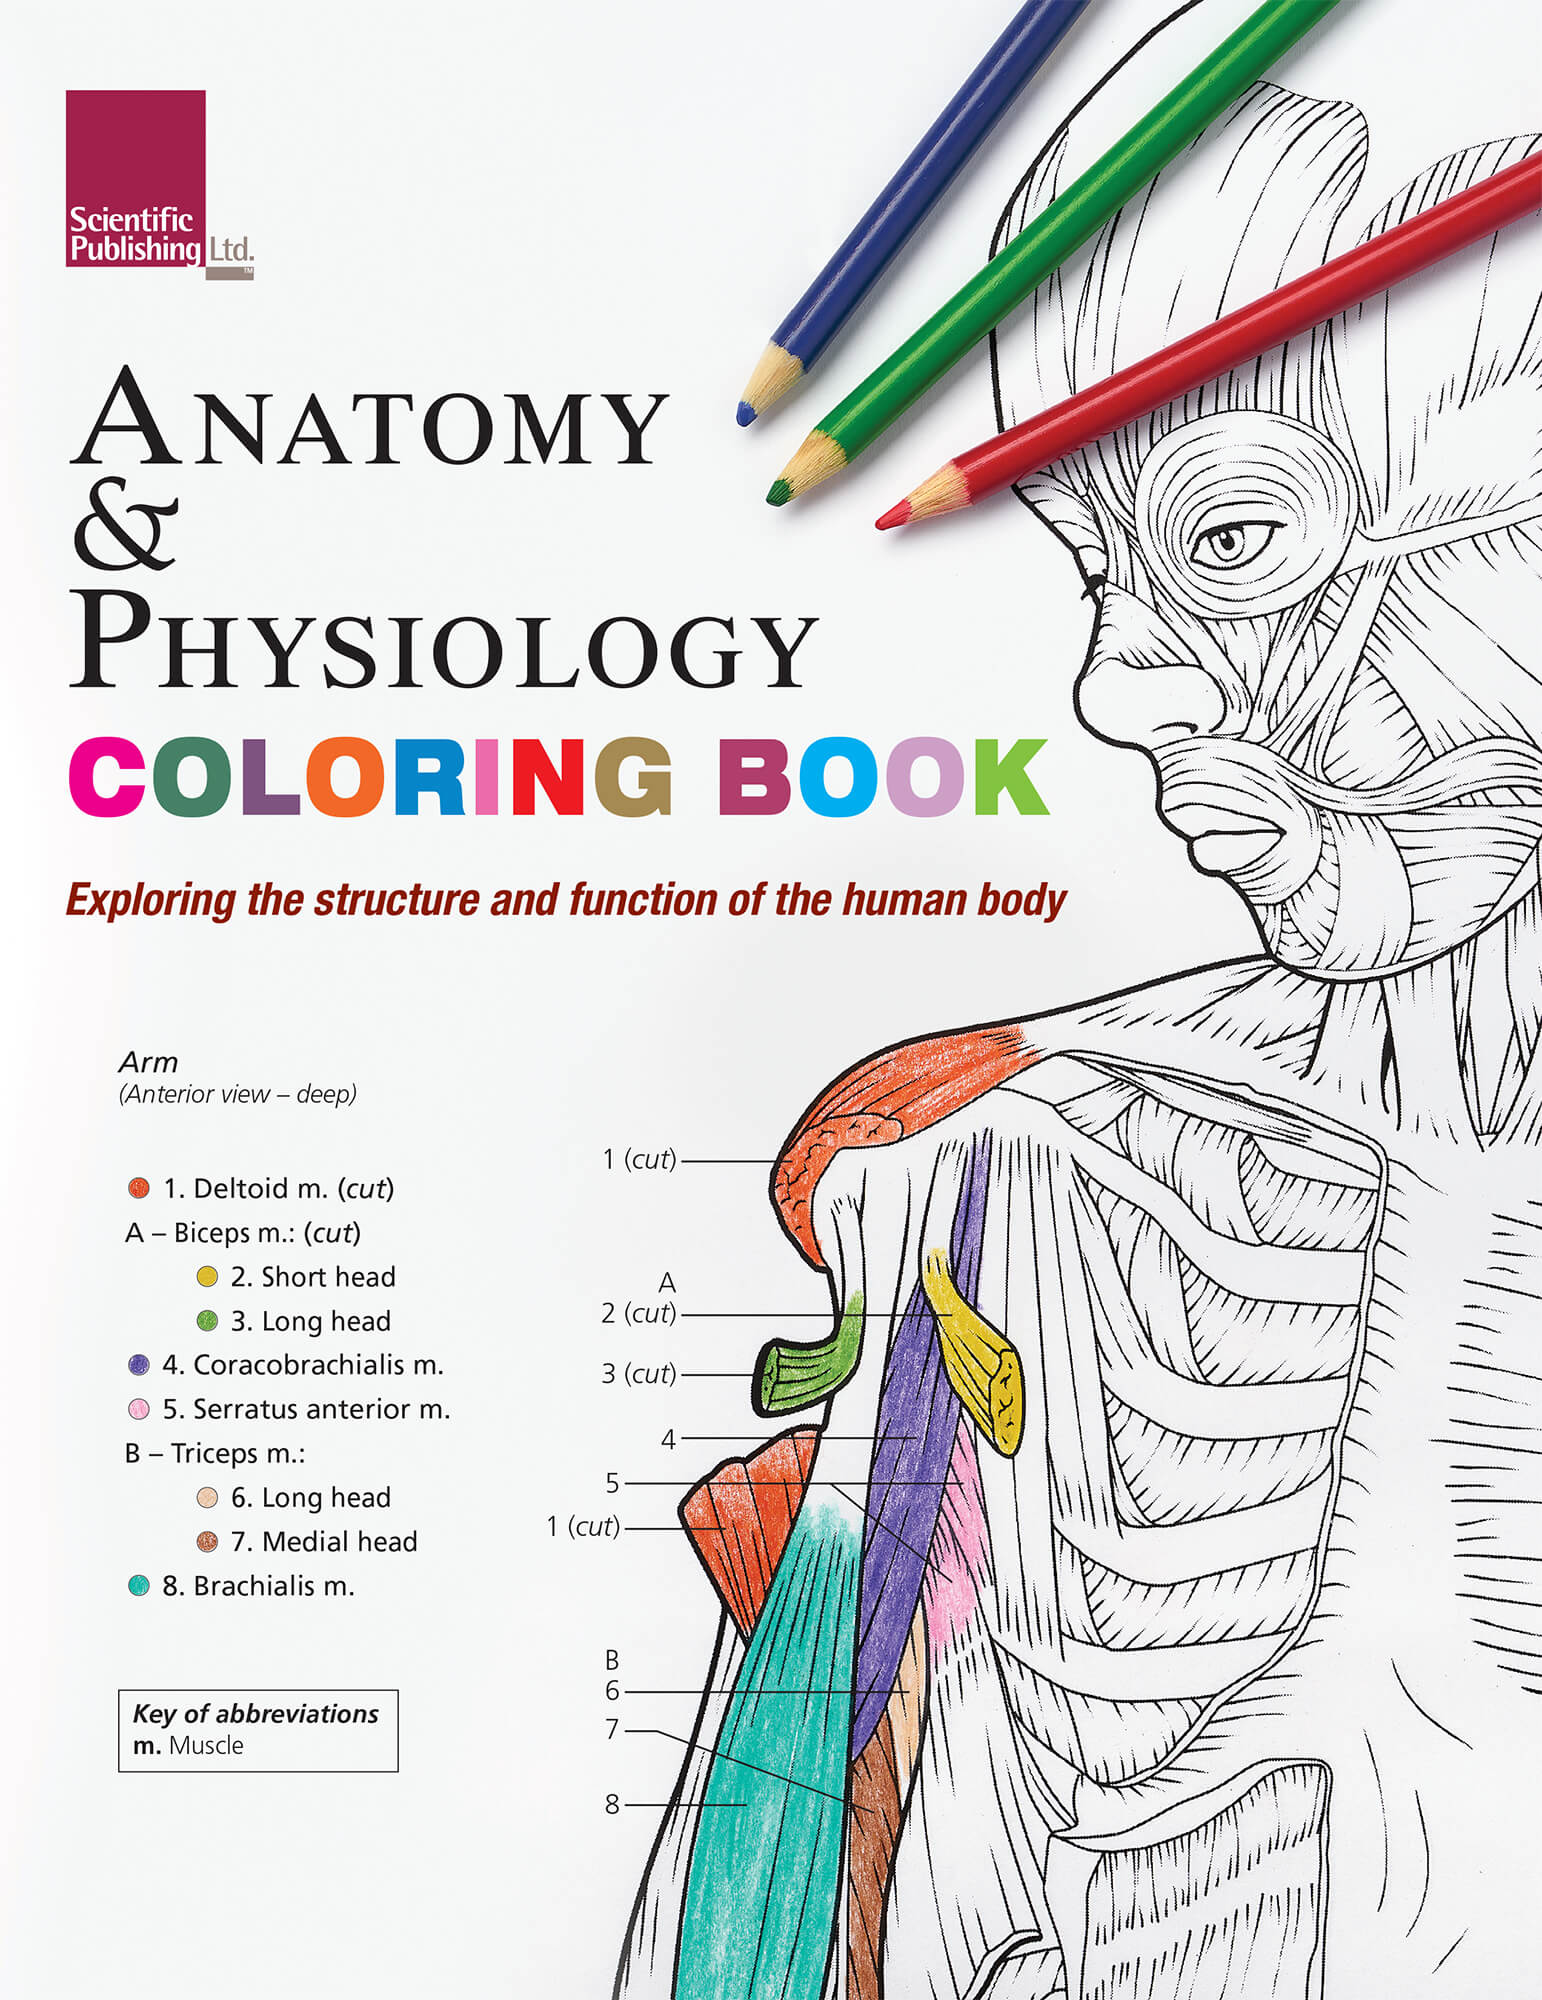 Anatomy physiology coloring book scientific publishing anatomy physiology coloring book anatomy physiology coloring book anatomy physiology coloring book